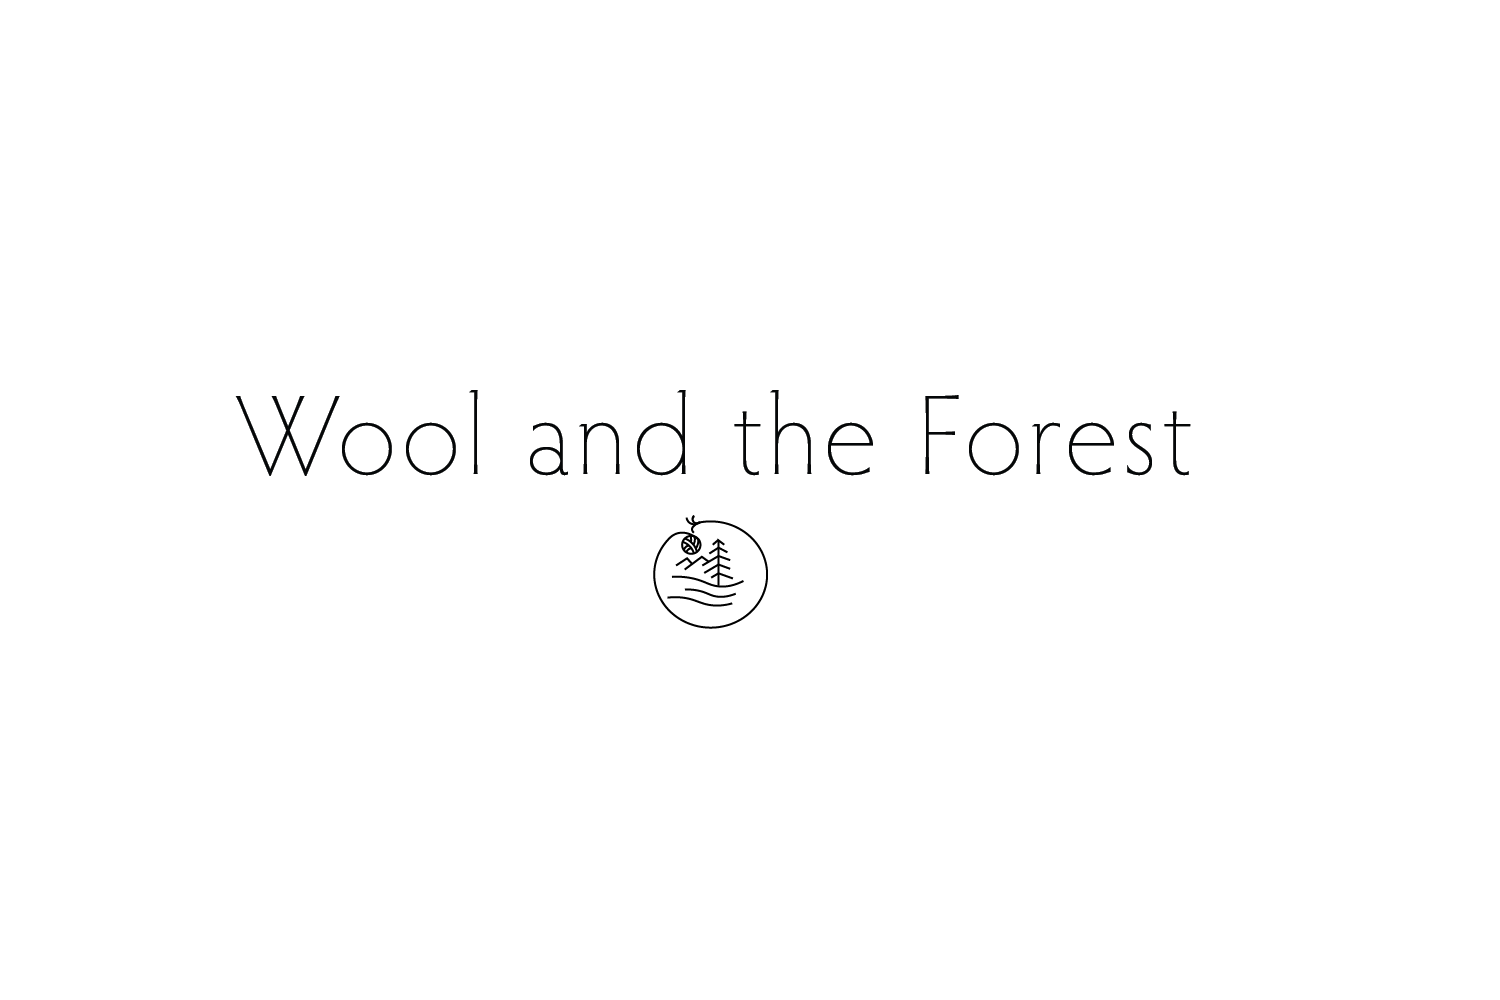 Wool and the Forest